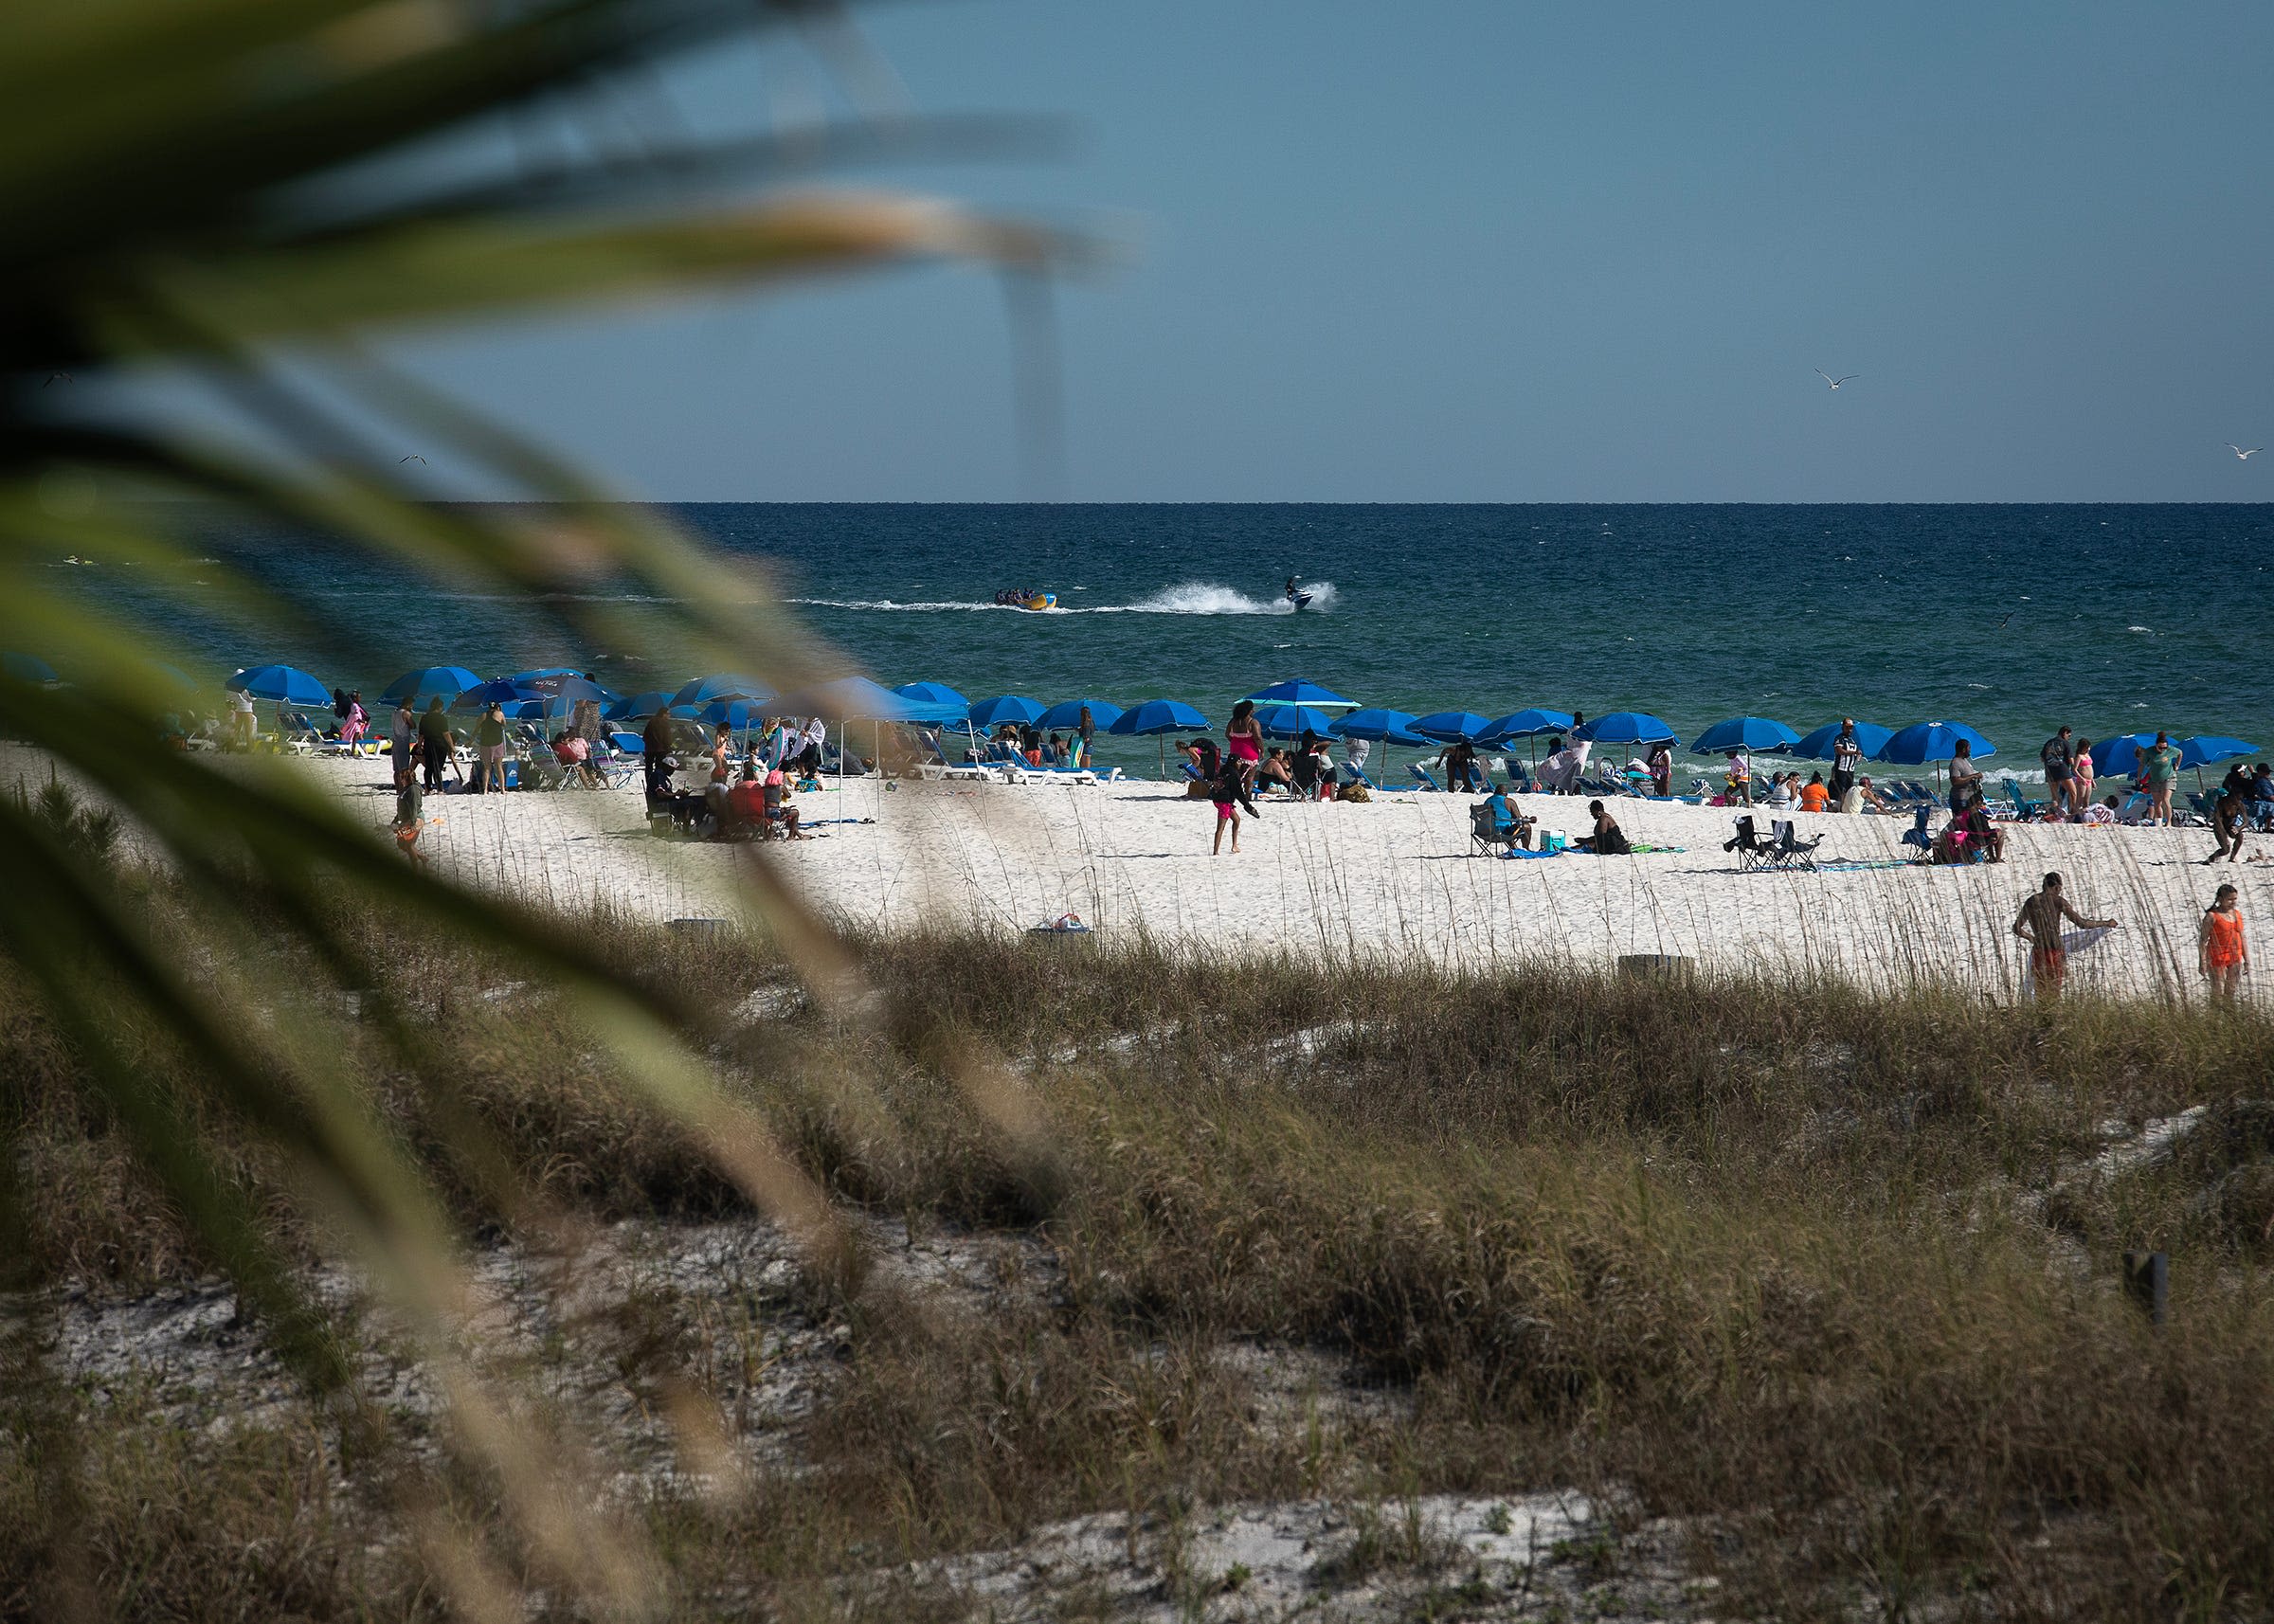 Panama City Beach nominated for 'Best Beach in Florida' by USA Today 10Best. How to vote